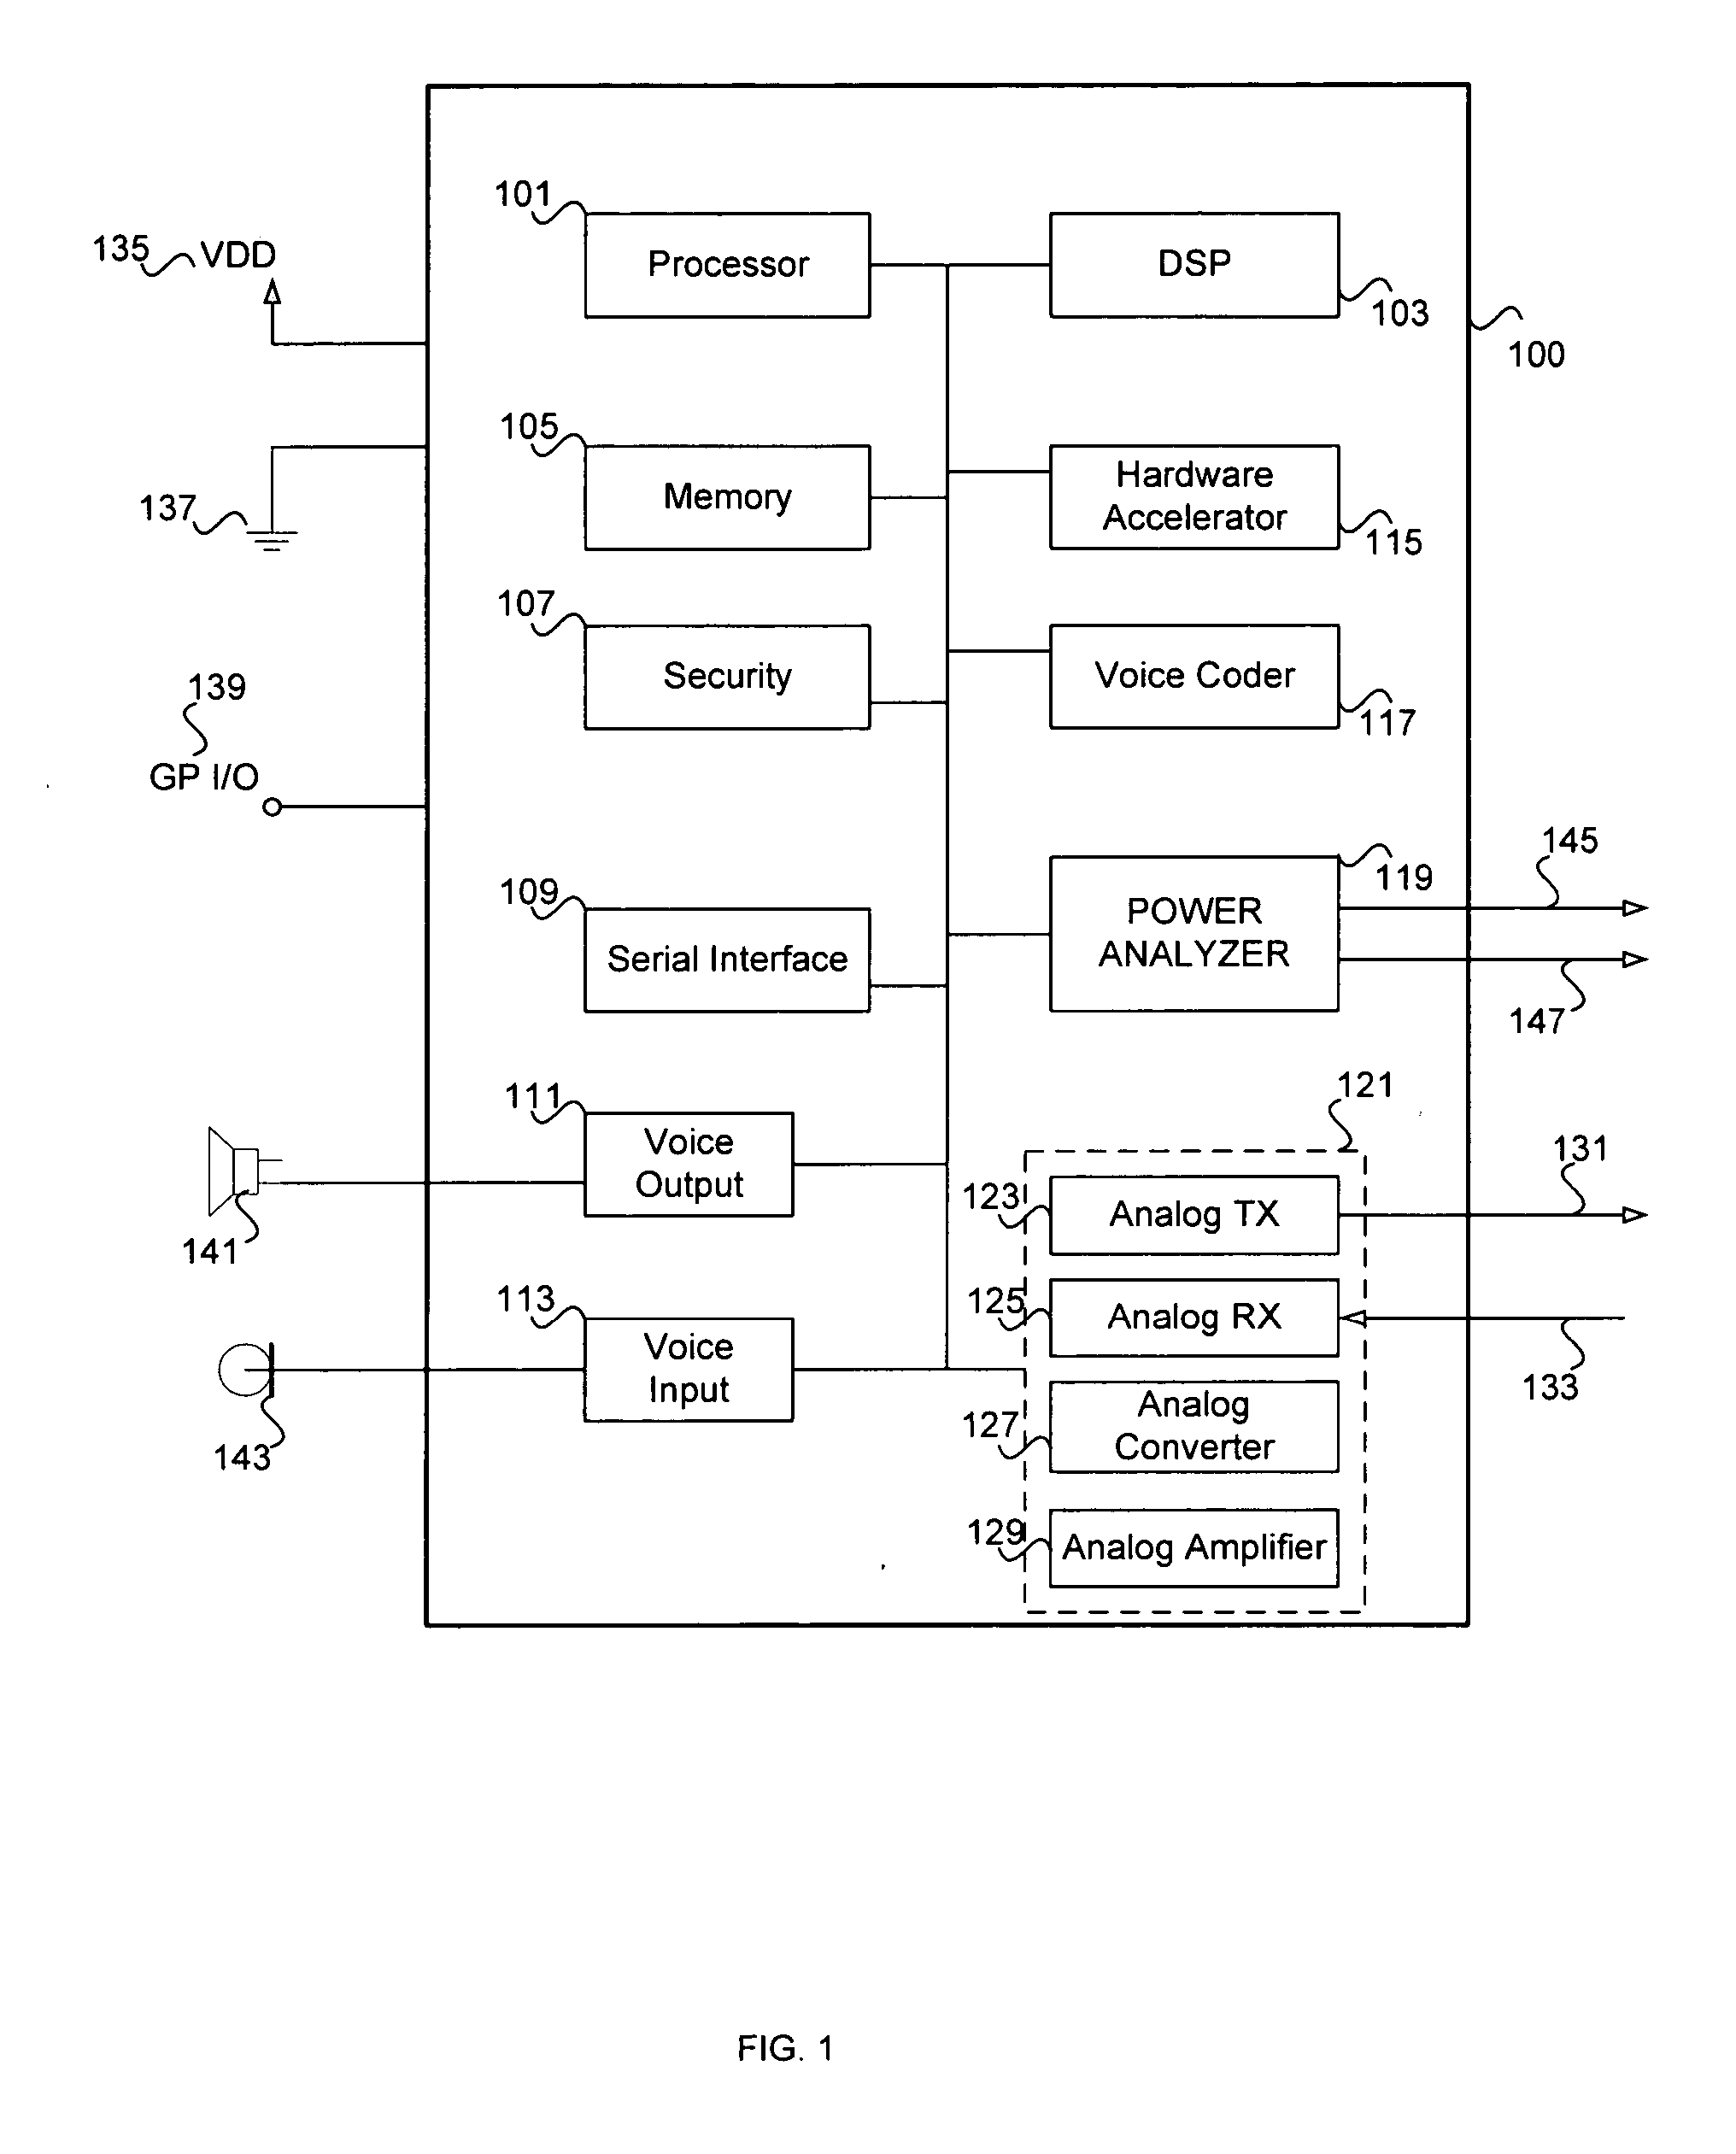 Method and system for monitoring module power status in a communication device